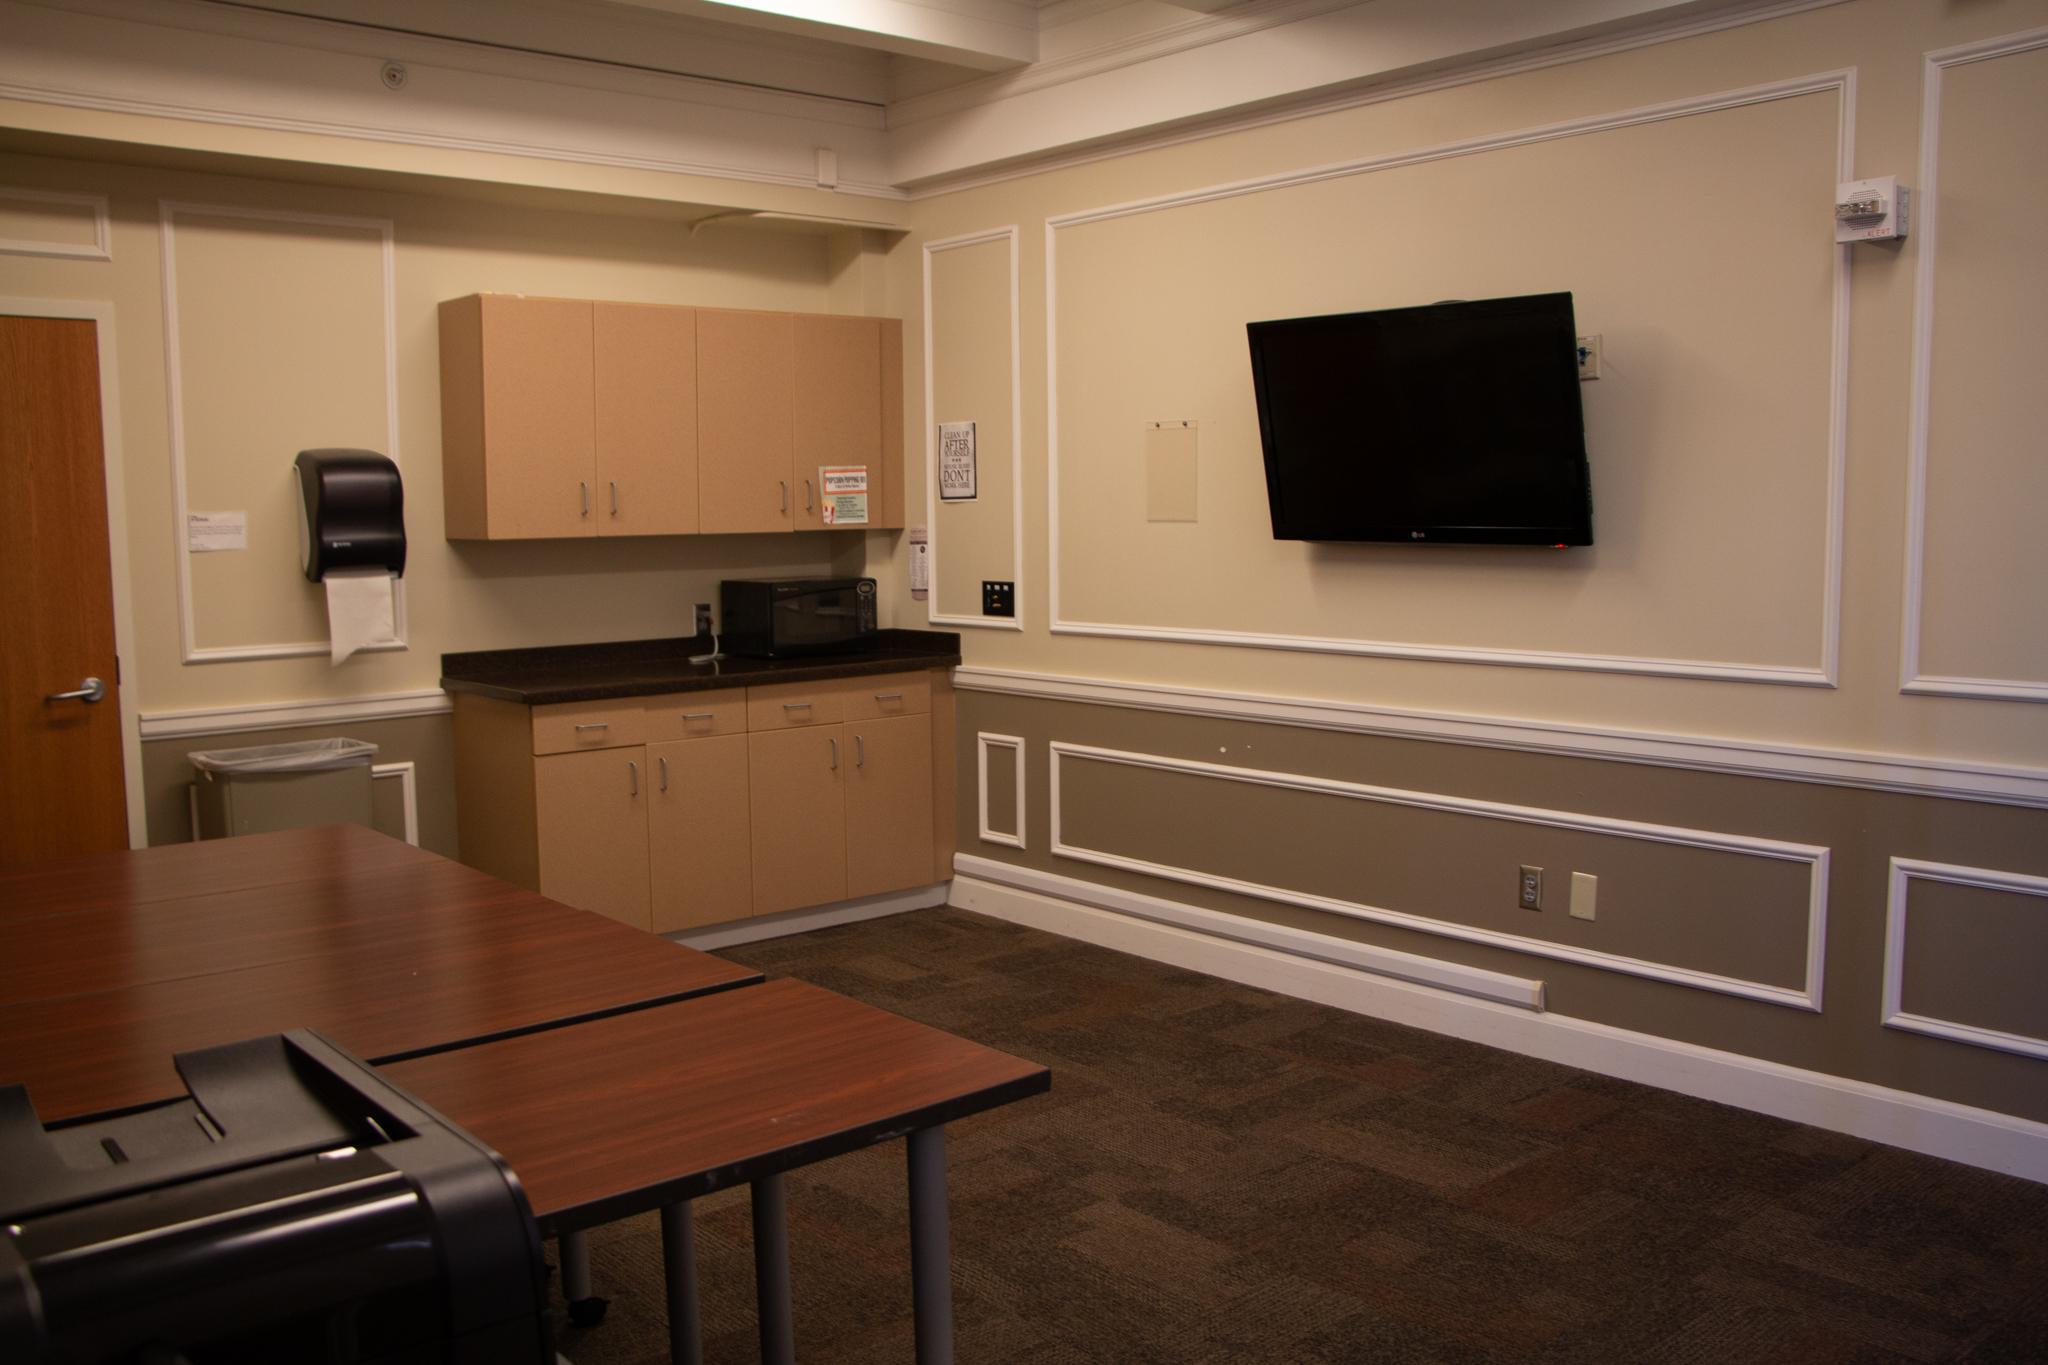 Morgan conference room with sink, wall mounted flatscreen tv and tables.